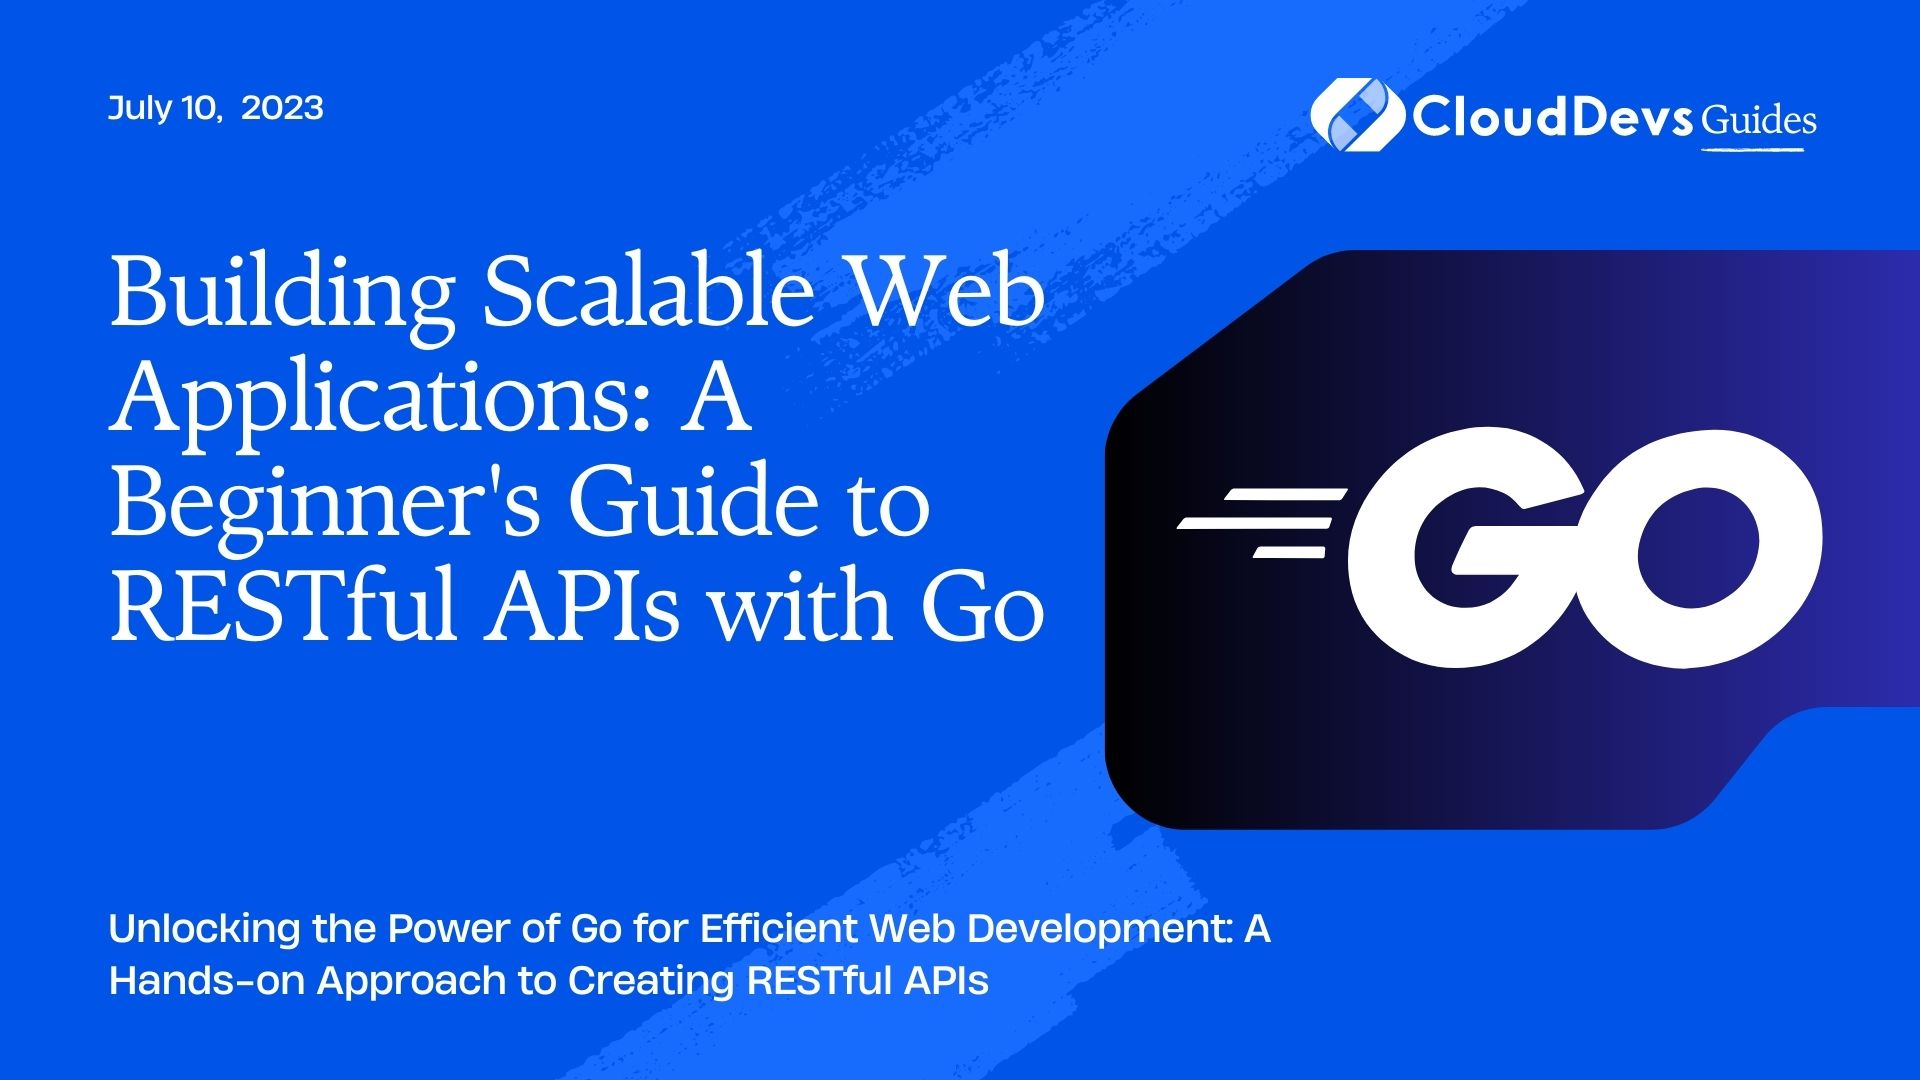 Building Scalable Web Applications: A Beginner's Guide to RESTful APIs with Go